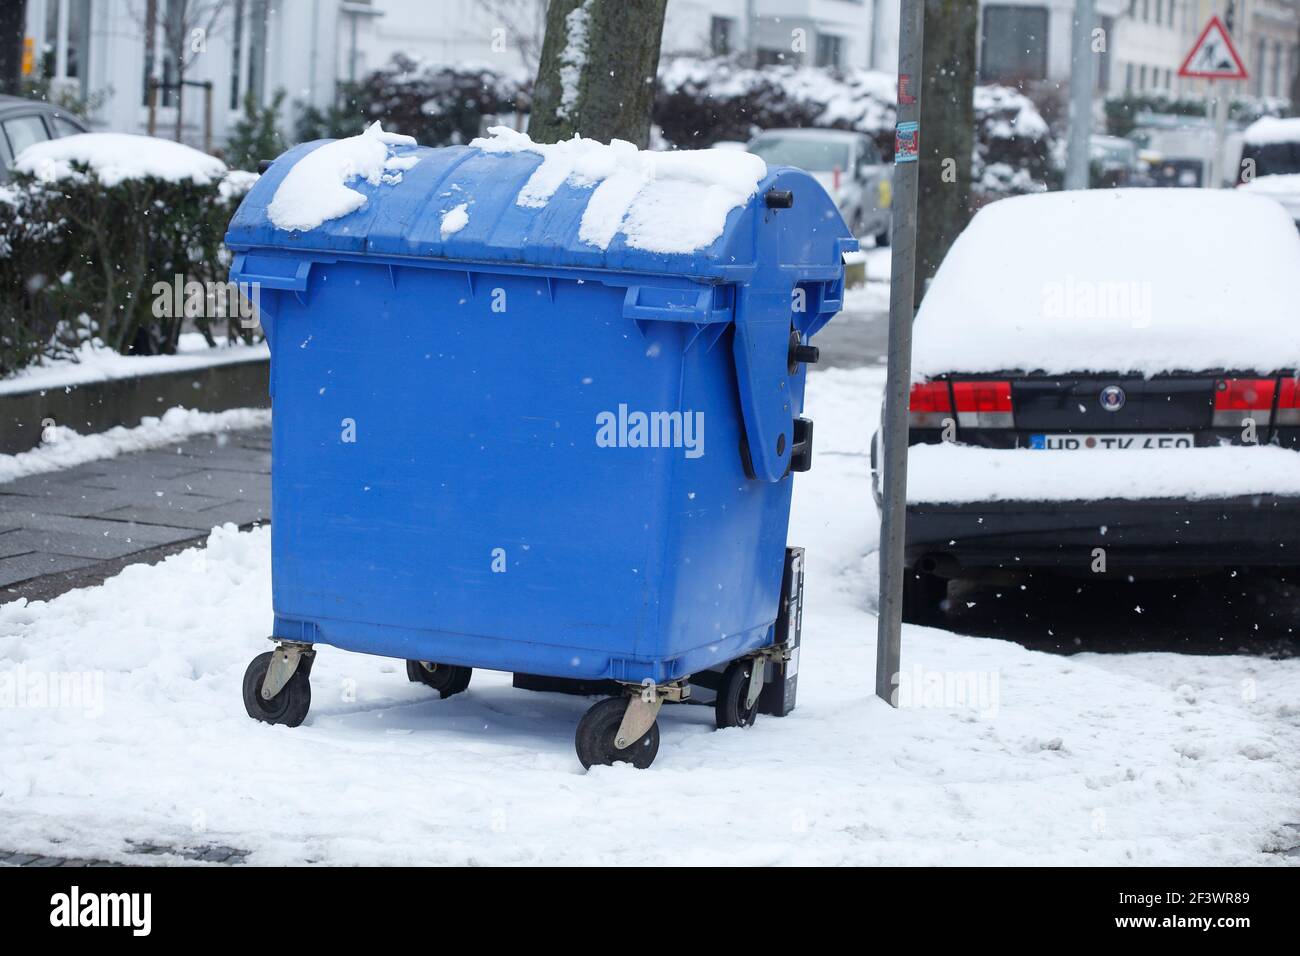 Dumpster covered with snow, Germany, Europe Stock Photo